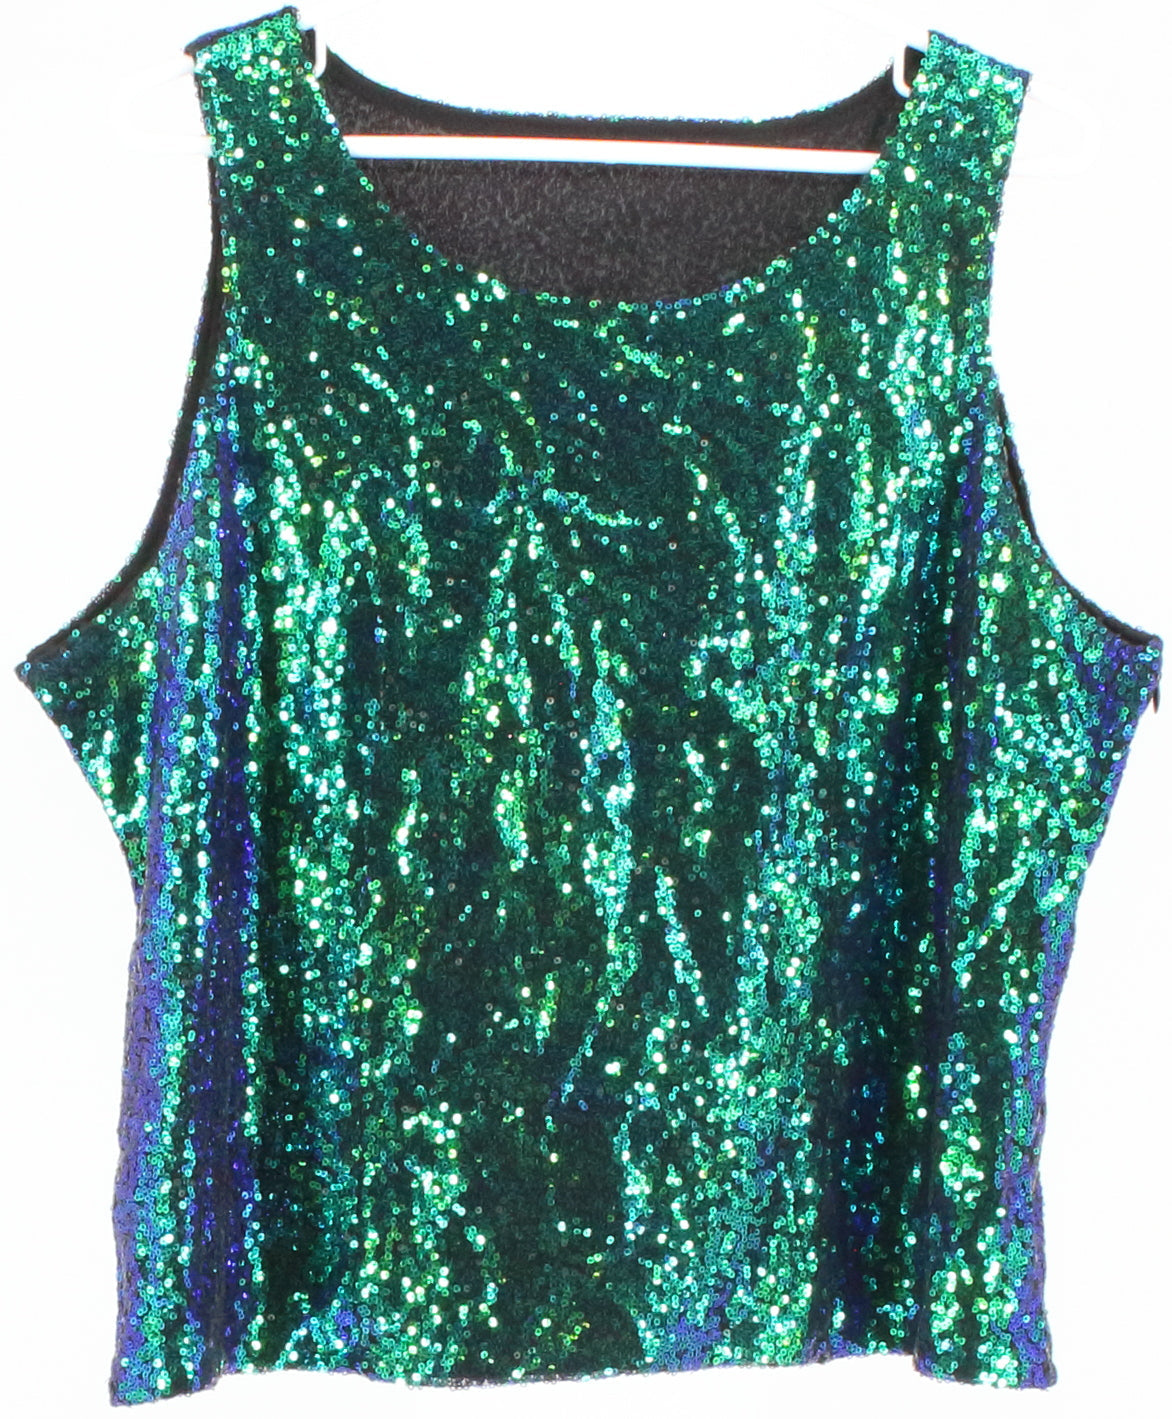 Green and Blue Sequins Sleeveless Top